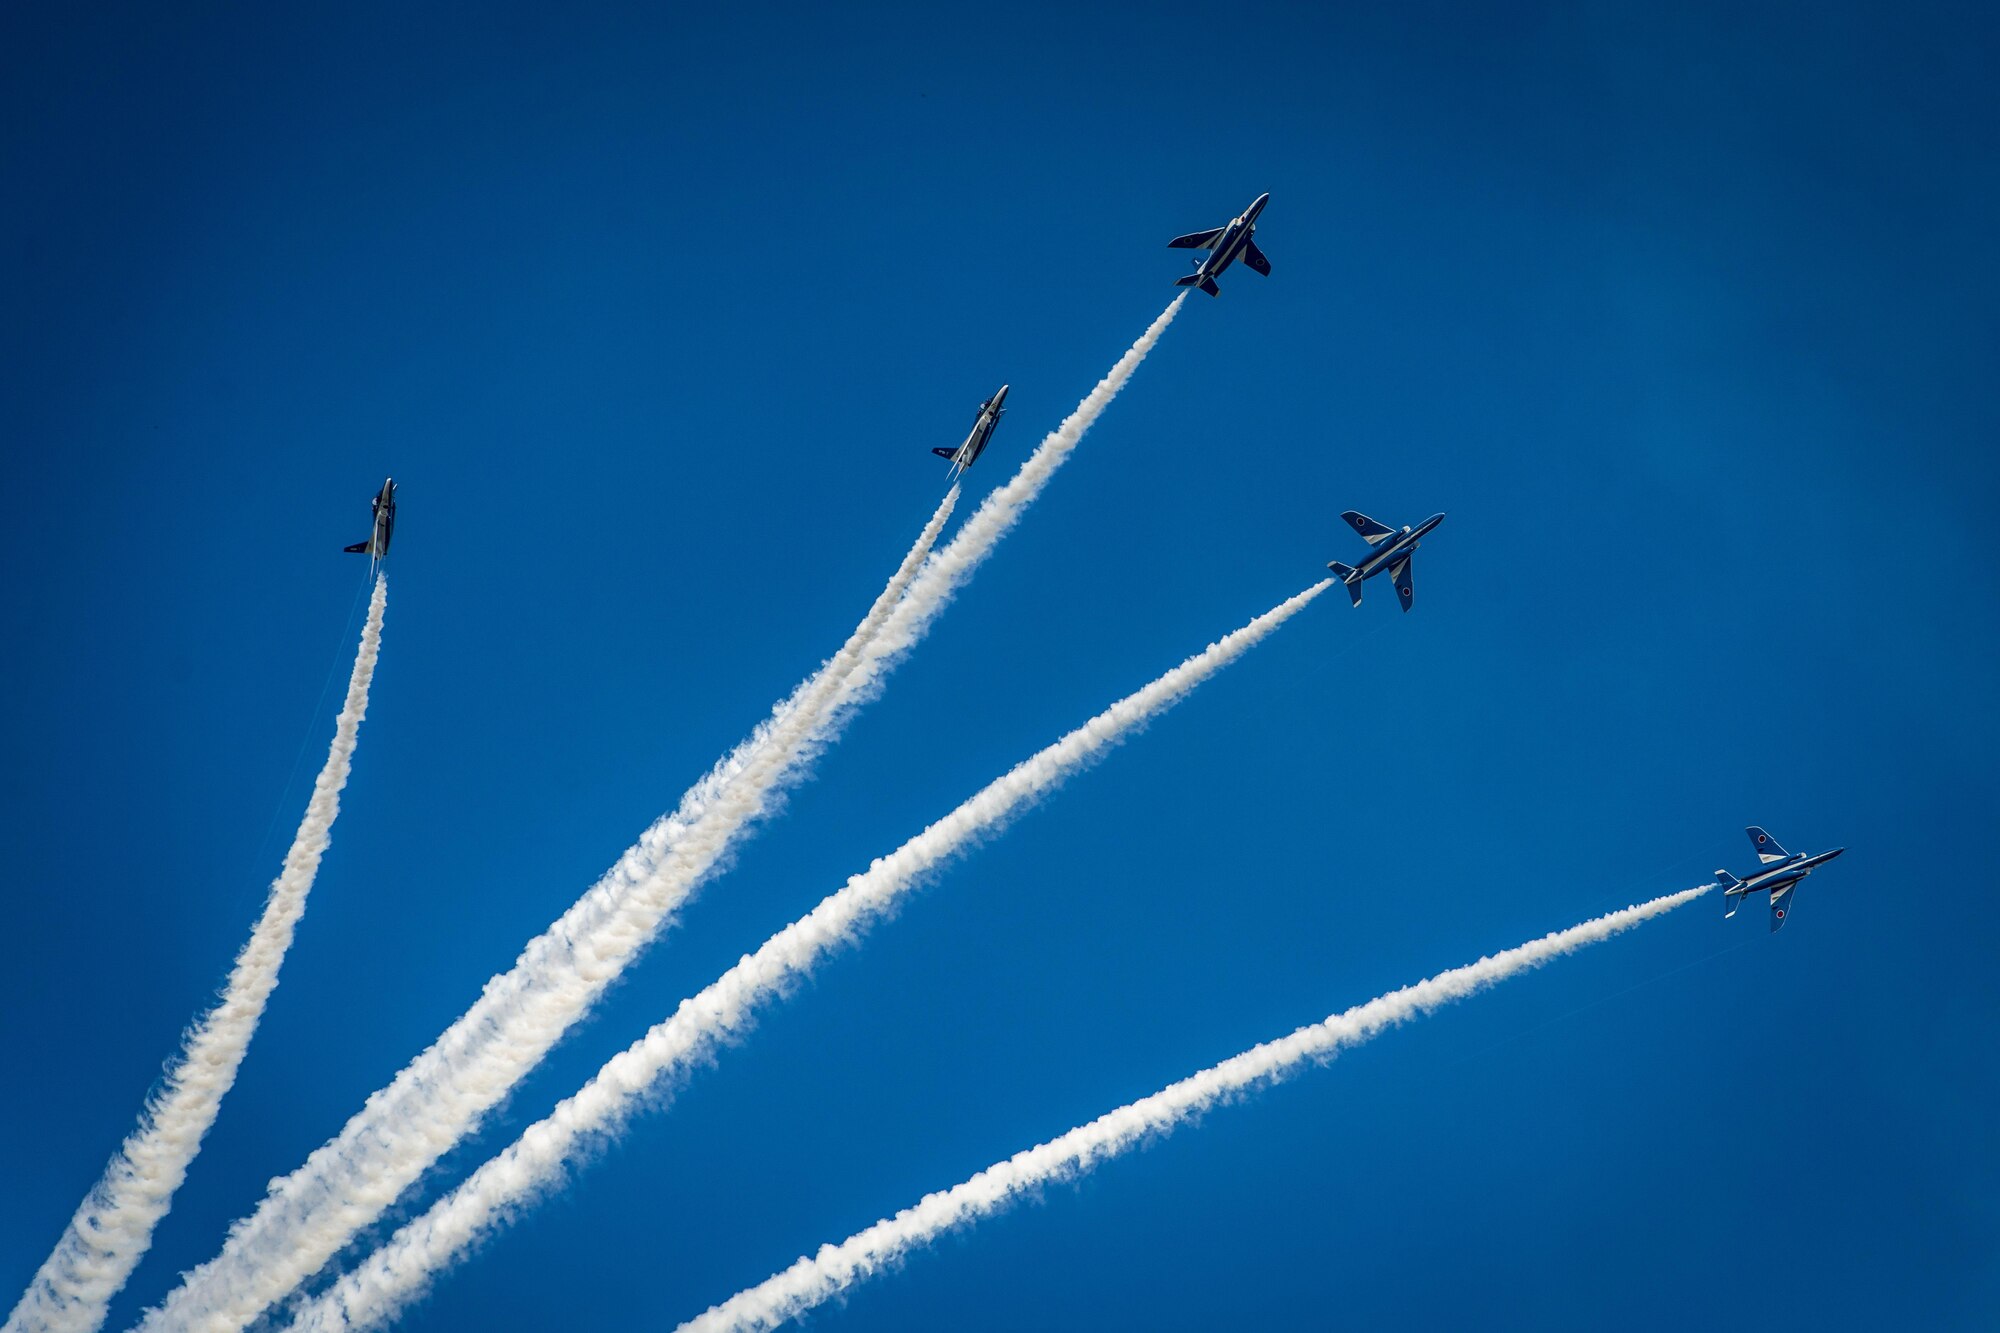 The Japan Air Self-Defense Force Blue Impulse aerial demonstration team performs a split maneuver during Misawa Air Fest 2016 at Misawa Air Base, Japan, Sept. 11, 2016. The Blue Impulse fly the Kawasaki T-4 which is a subsonic intermediate jet trainer aircraft. The T-4 entered service in 1985 and has since been JASDF’s flagship demo team aircraft. The performance lasted through part of the afternoon engaging the more than 80,000 people who attended this annual air show. (U.S. Air Force photo by Staff Sgt. Benjamin W. Stratton)